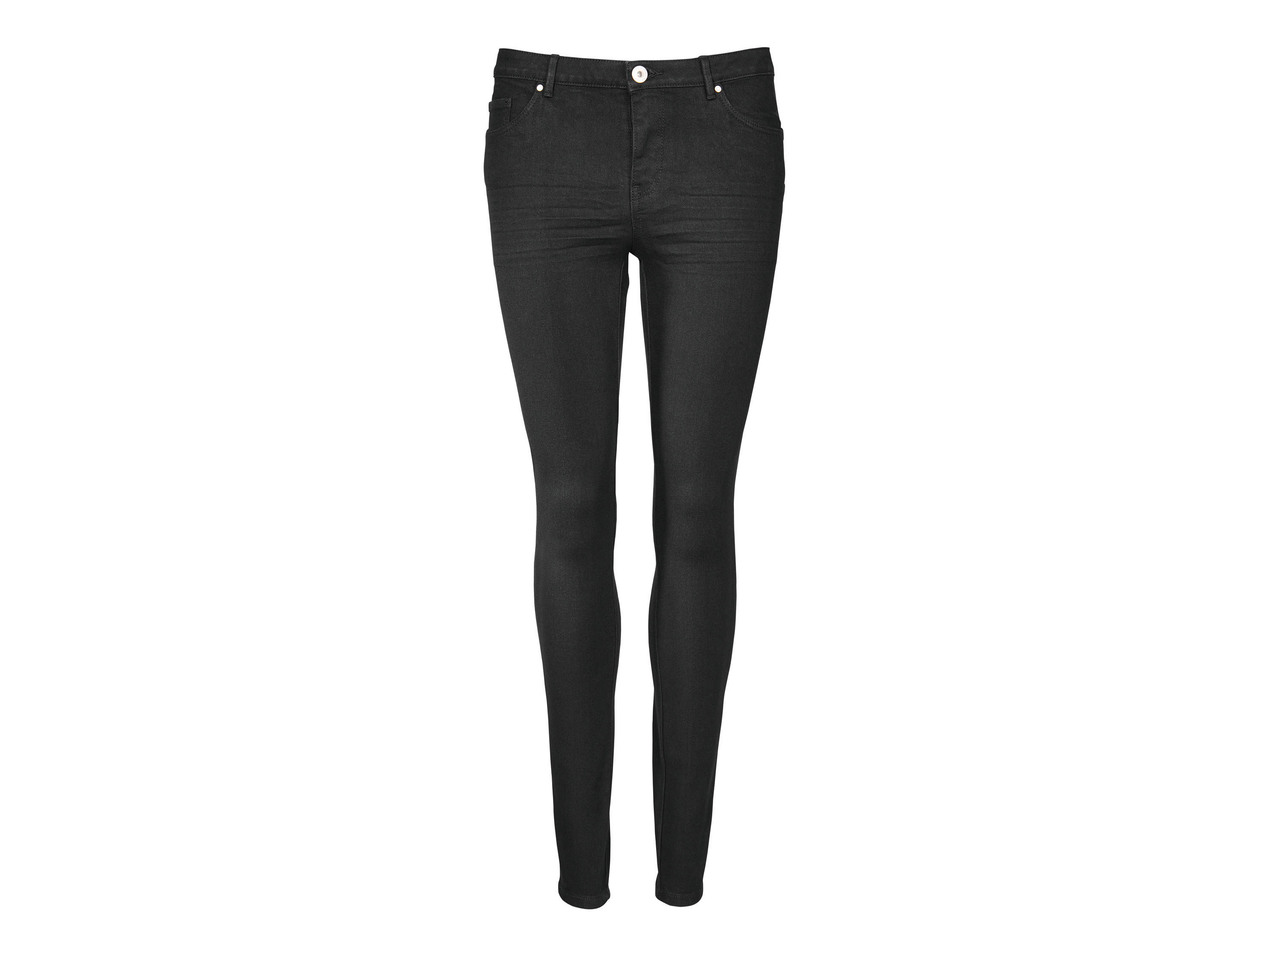 Ladies' "Super Skinny" Jeans with push-up effect